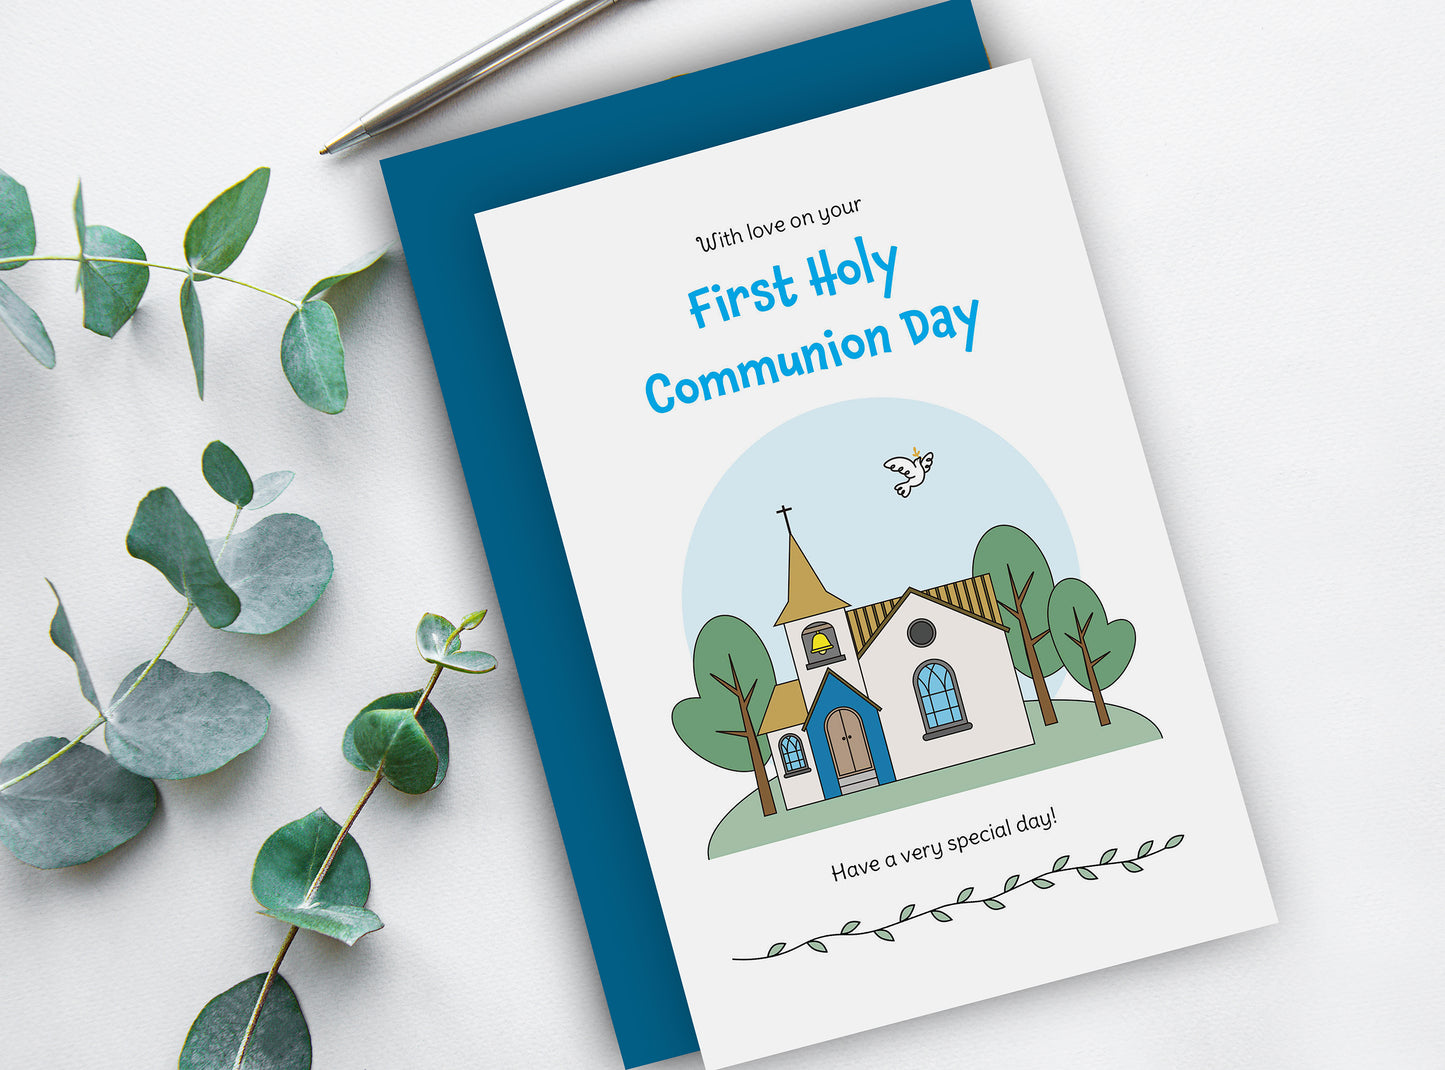 Boy's Framed Communion illustration Gift WITH matching card & Gift Bag